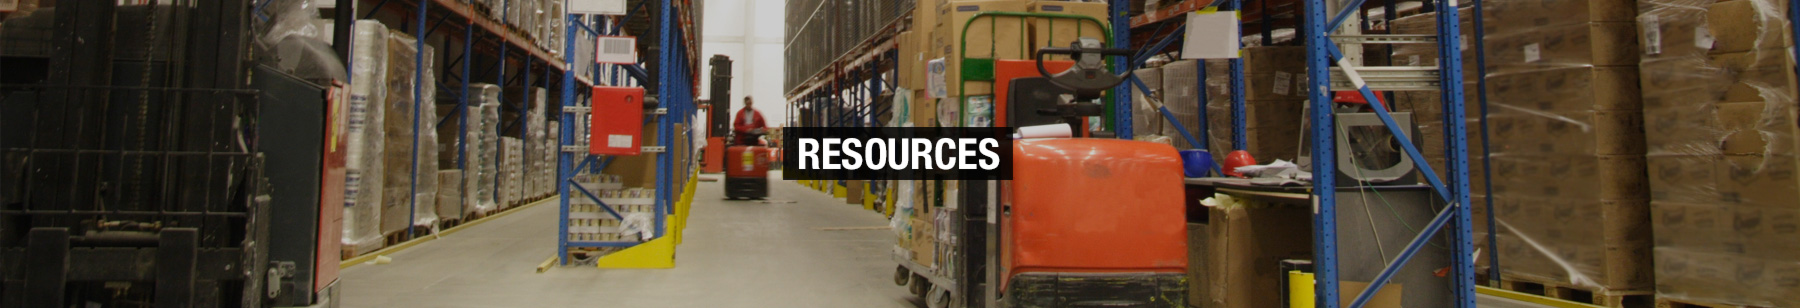 Forklift Literature and other Material Handling Equipment Resources